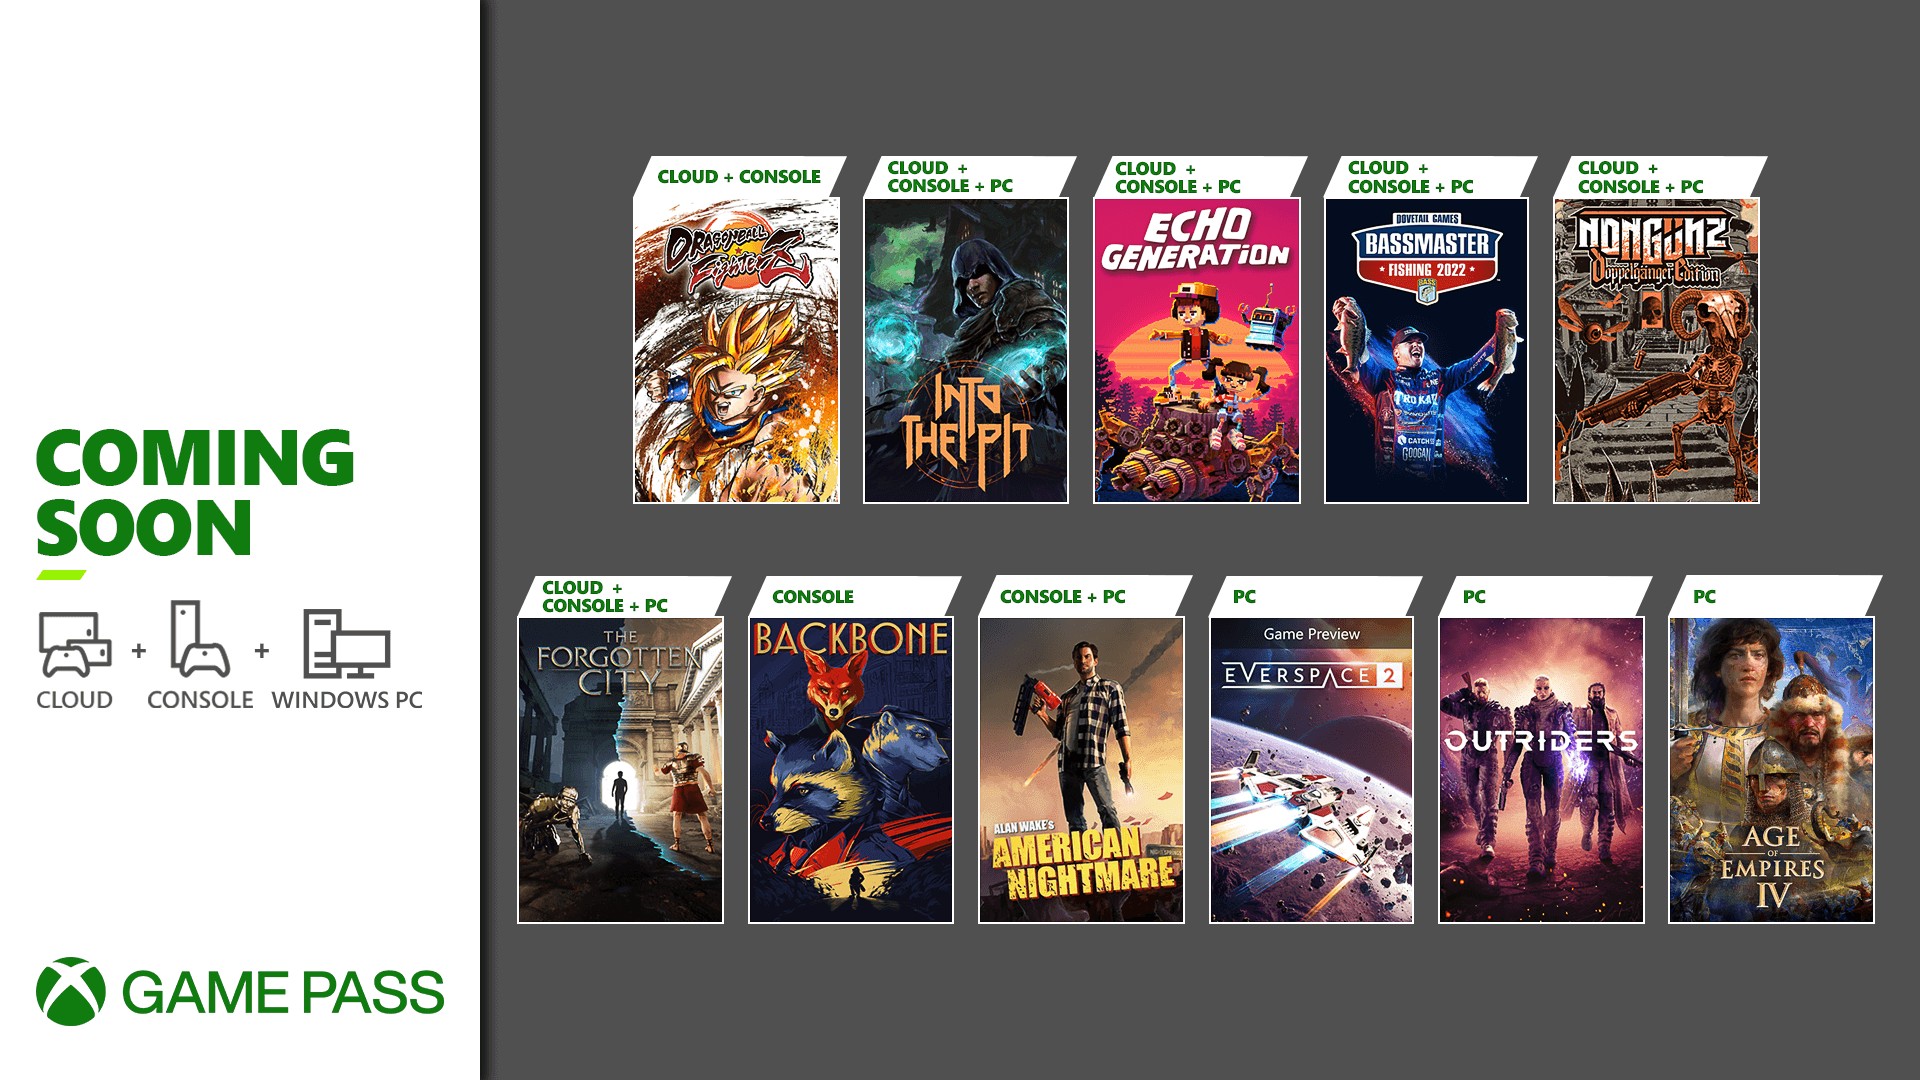 Xbox Game Pass Coming Soon - October 2021